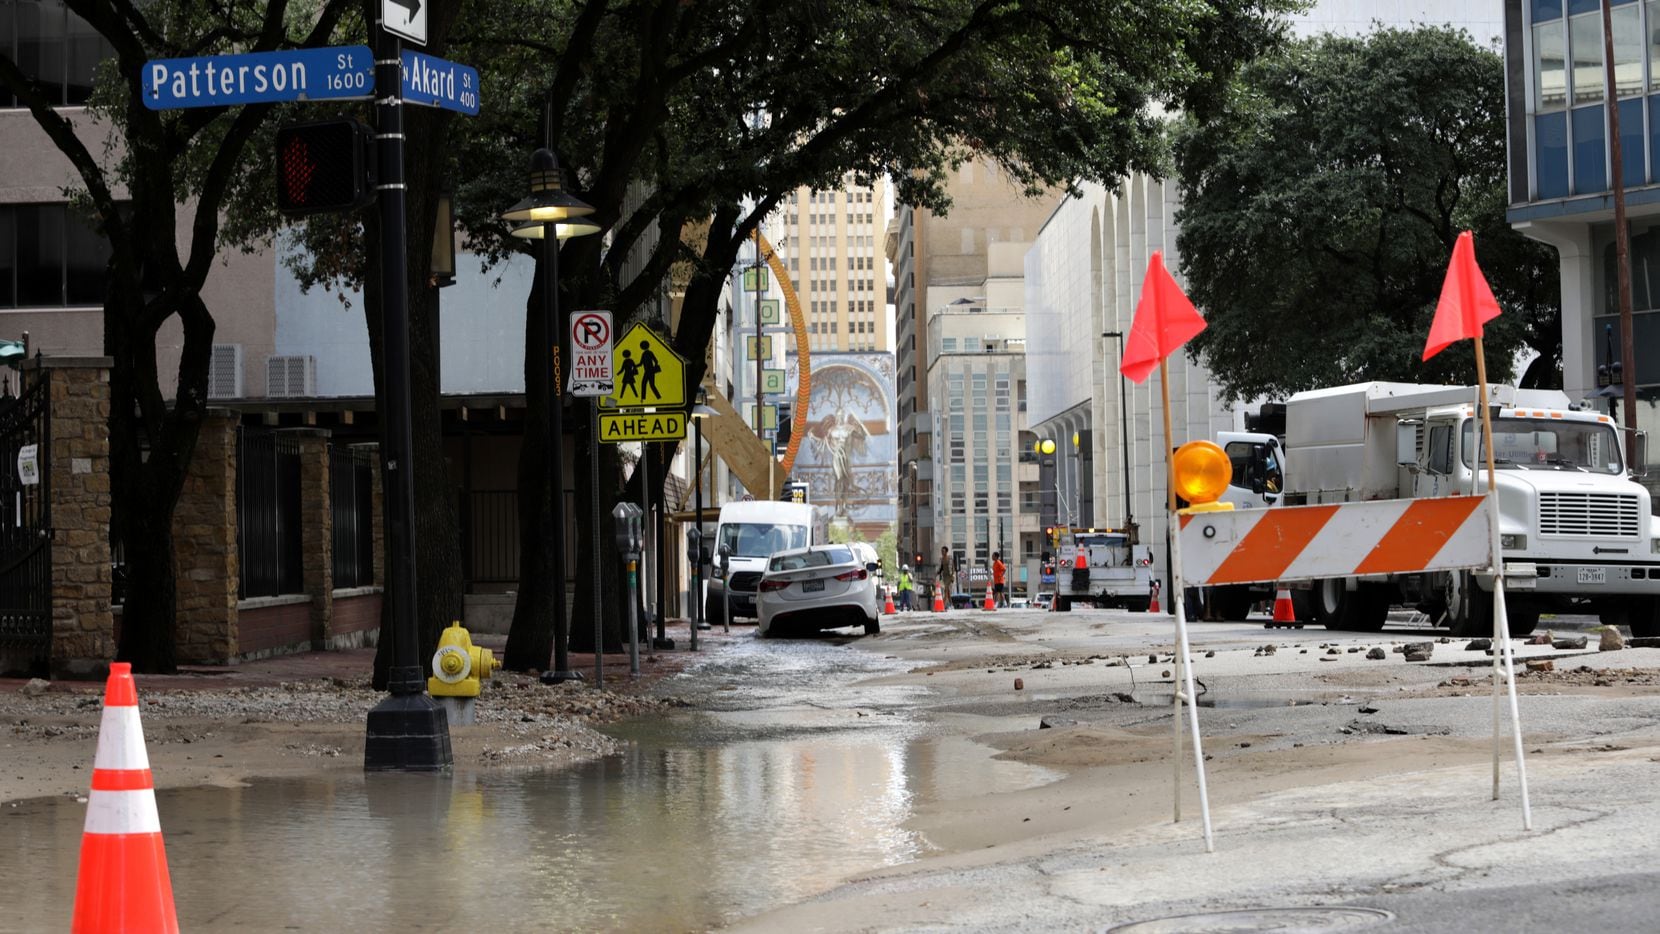 Workers secure an area damaged by a water main break at Akard Street and Patterson Street in...